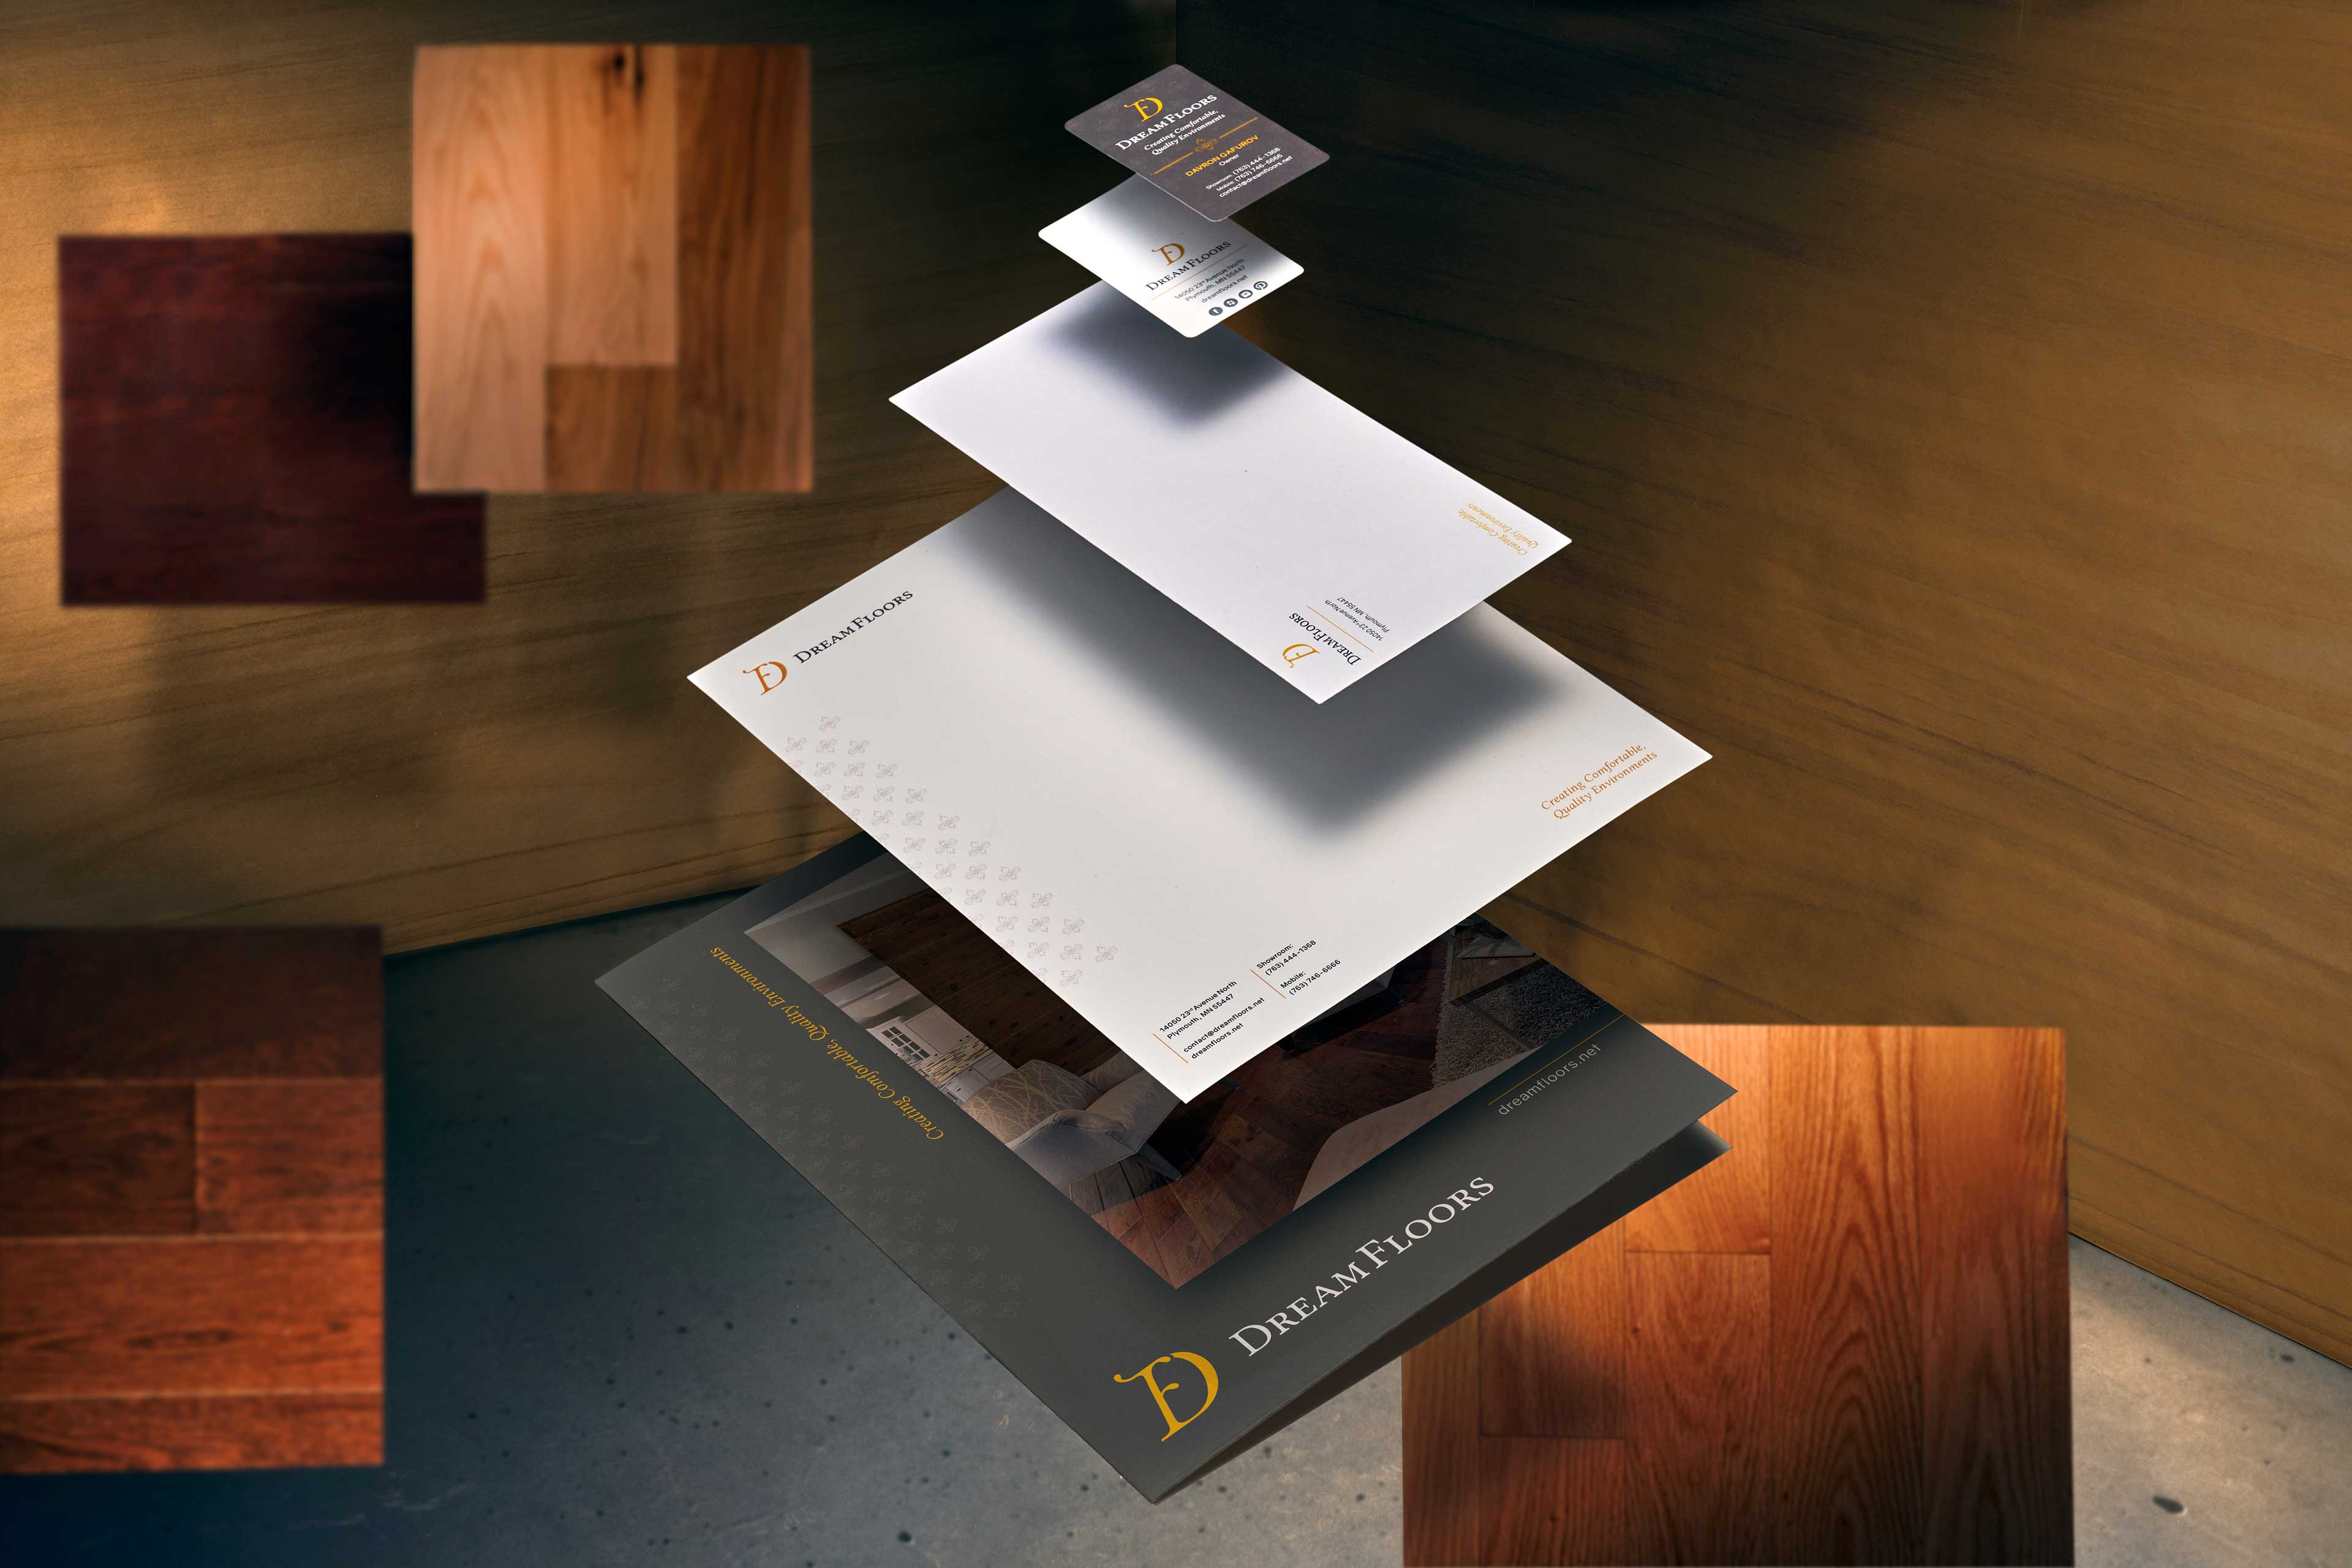 The Dream Floors collateral system, floating in a dream-like space, consists of business cards, envelopes, letterhead and a pocket folder.